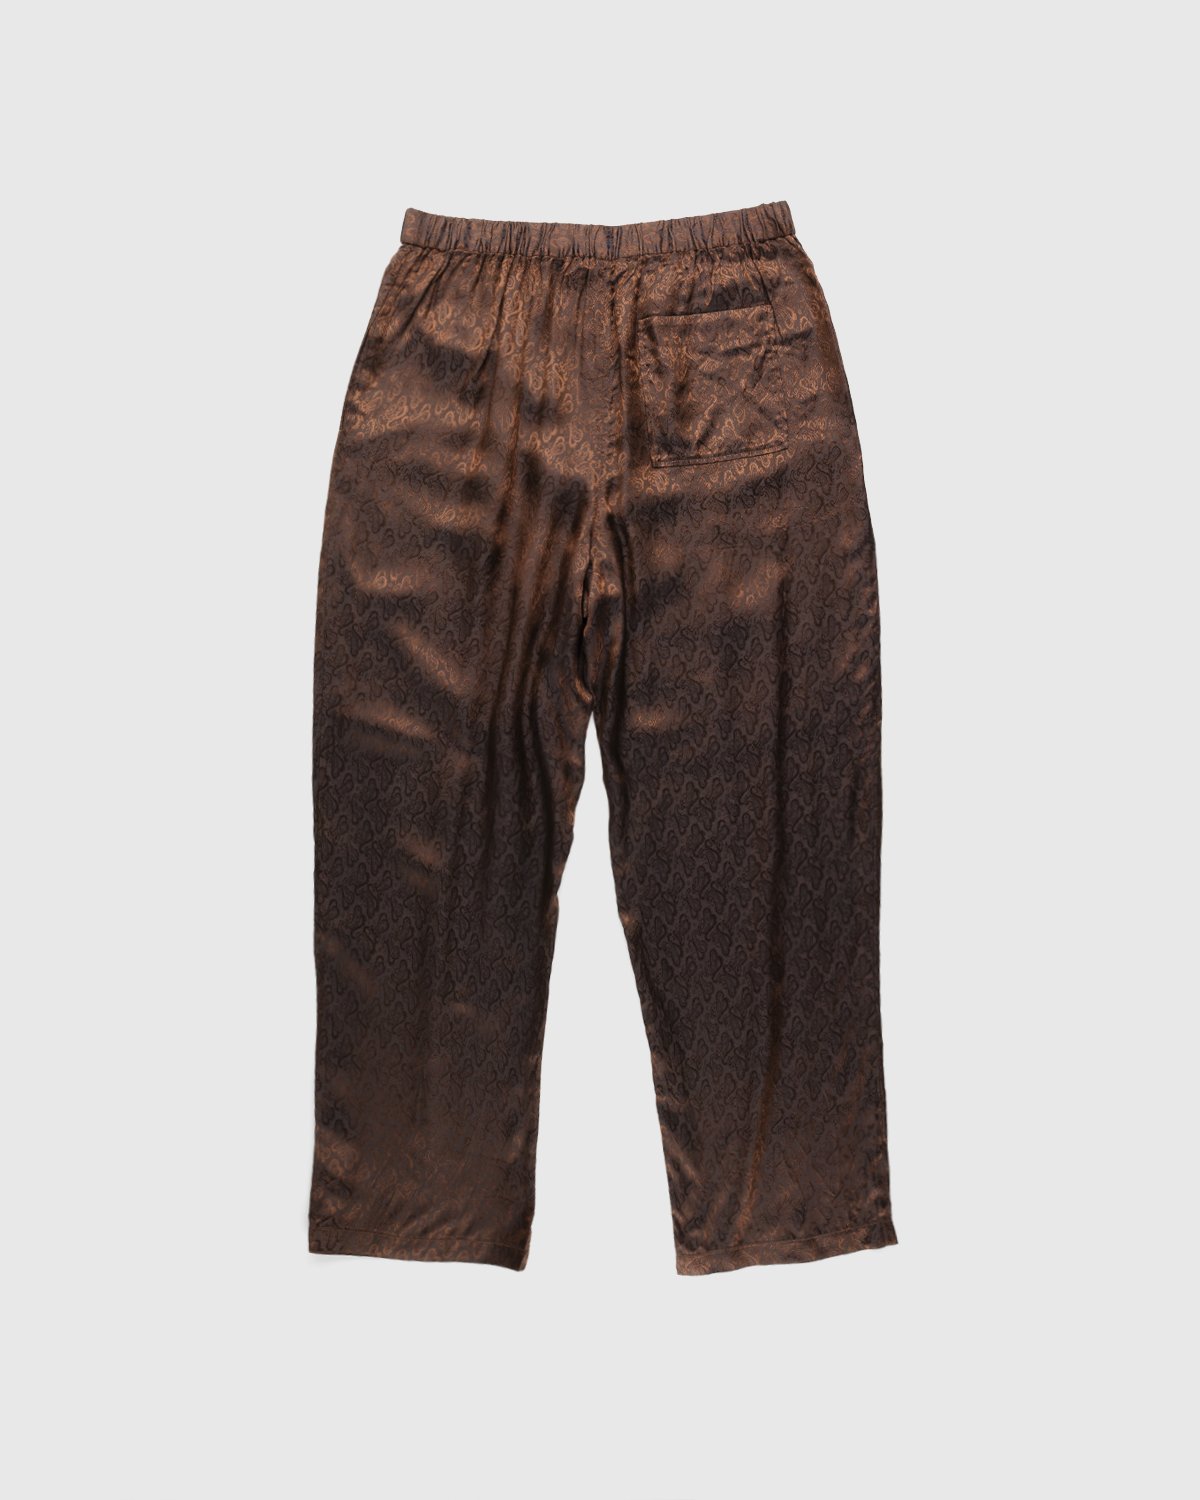 Acne Studios - Jacquard Trousers Brown - Clothing - Brown - Image 2